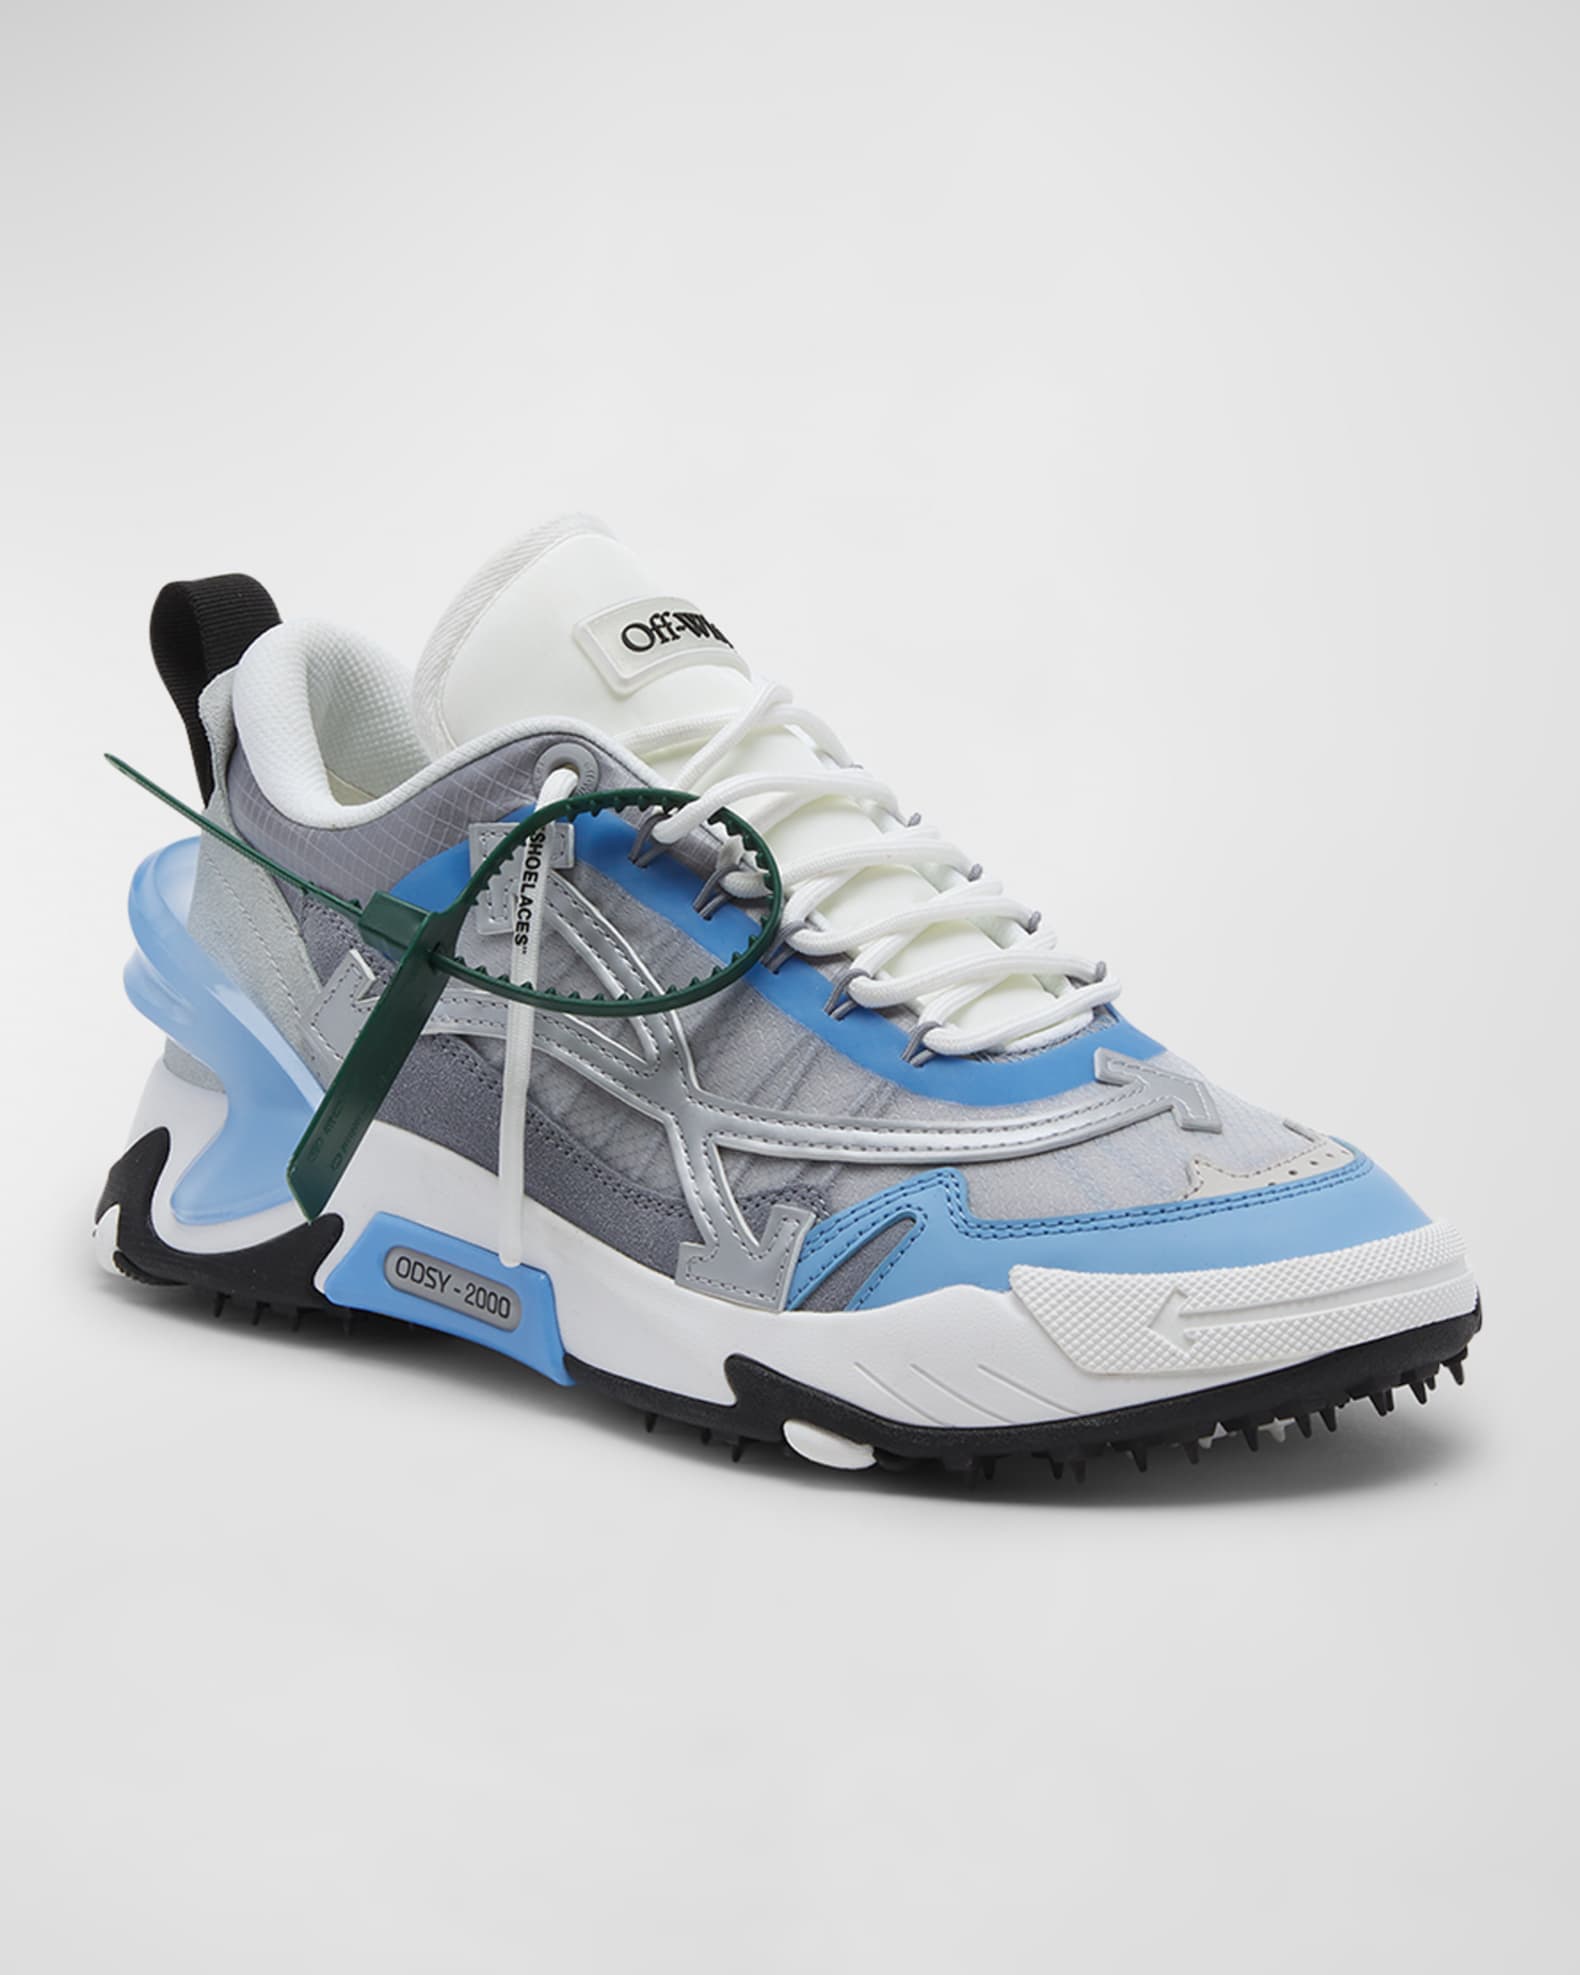 Off-White Odsy 2000 Colorblock Trainer Sneakers | Neiman Marcus